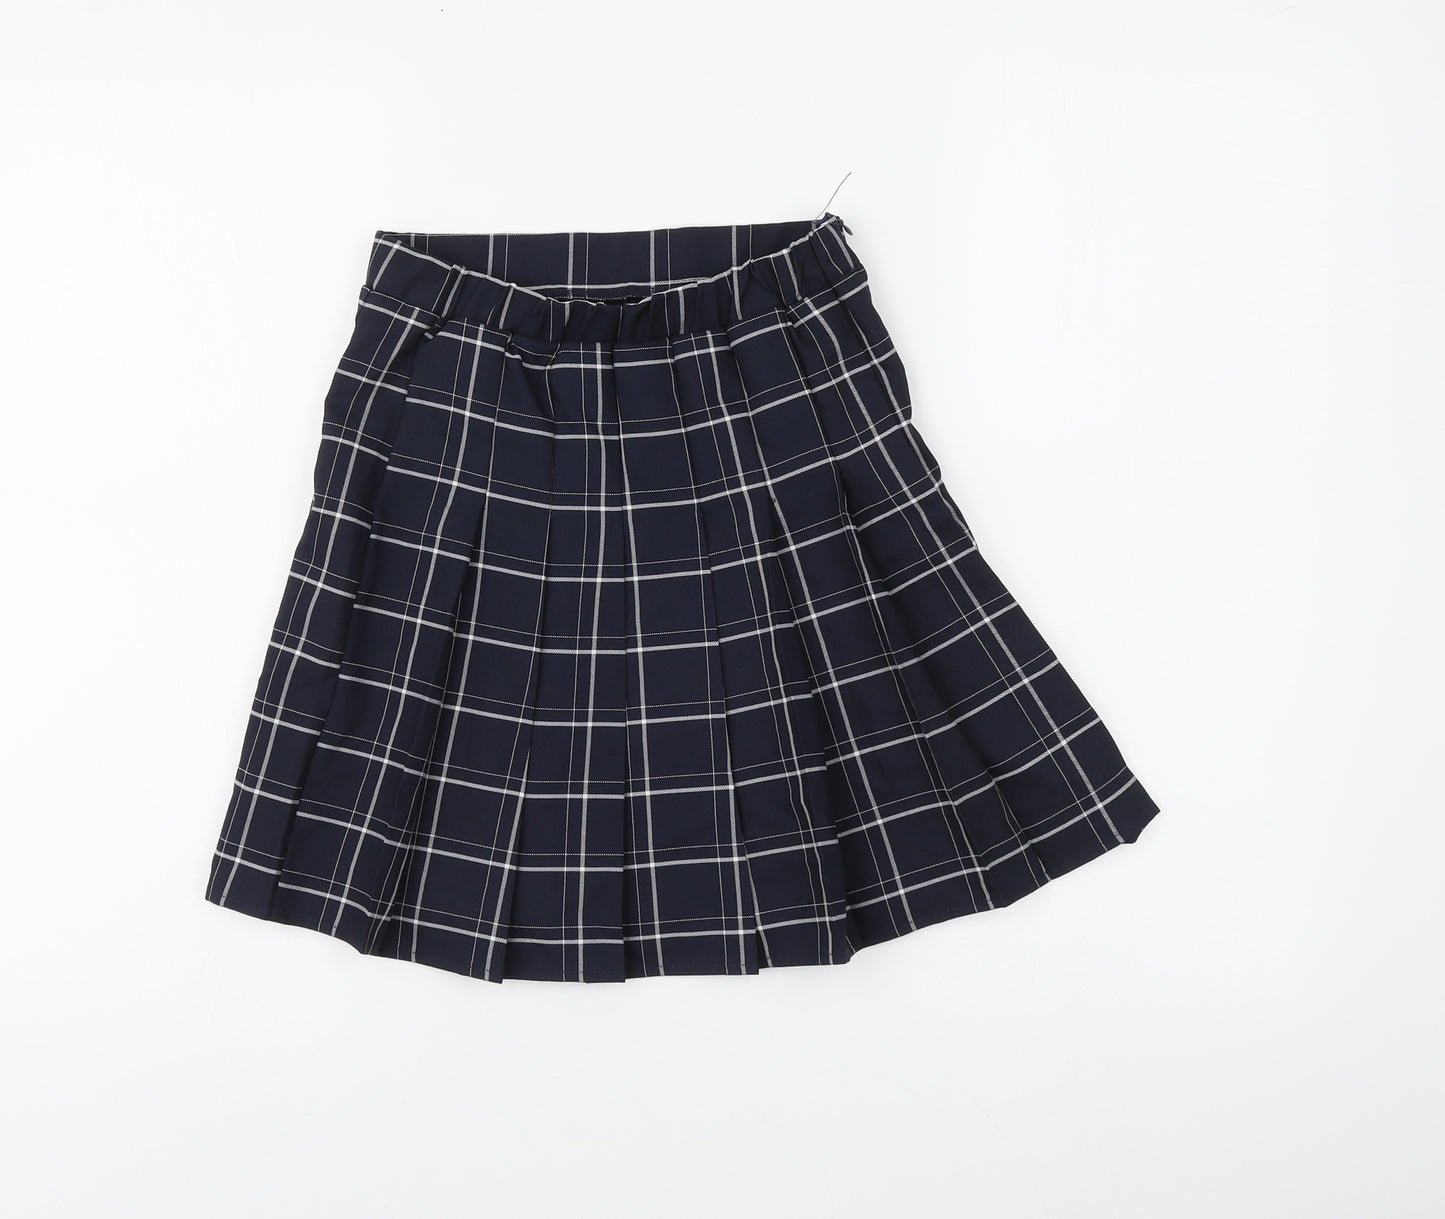 SheIn Girls Blue Plaid Polyester Pleated Skirt Size 12-13 Years Regular Button